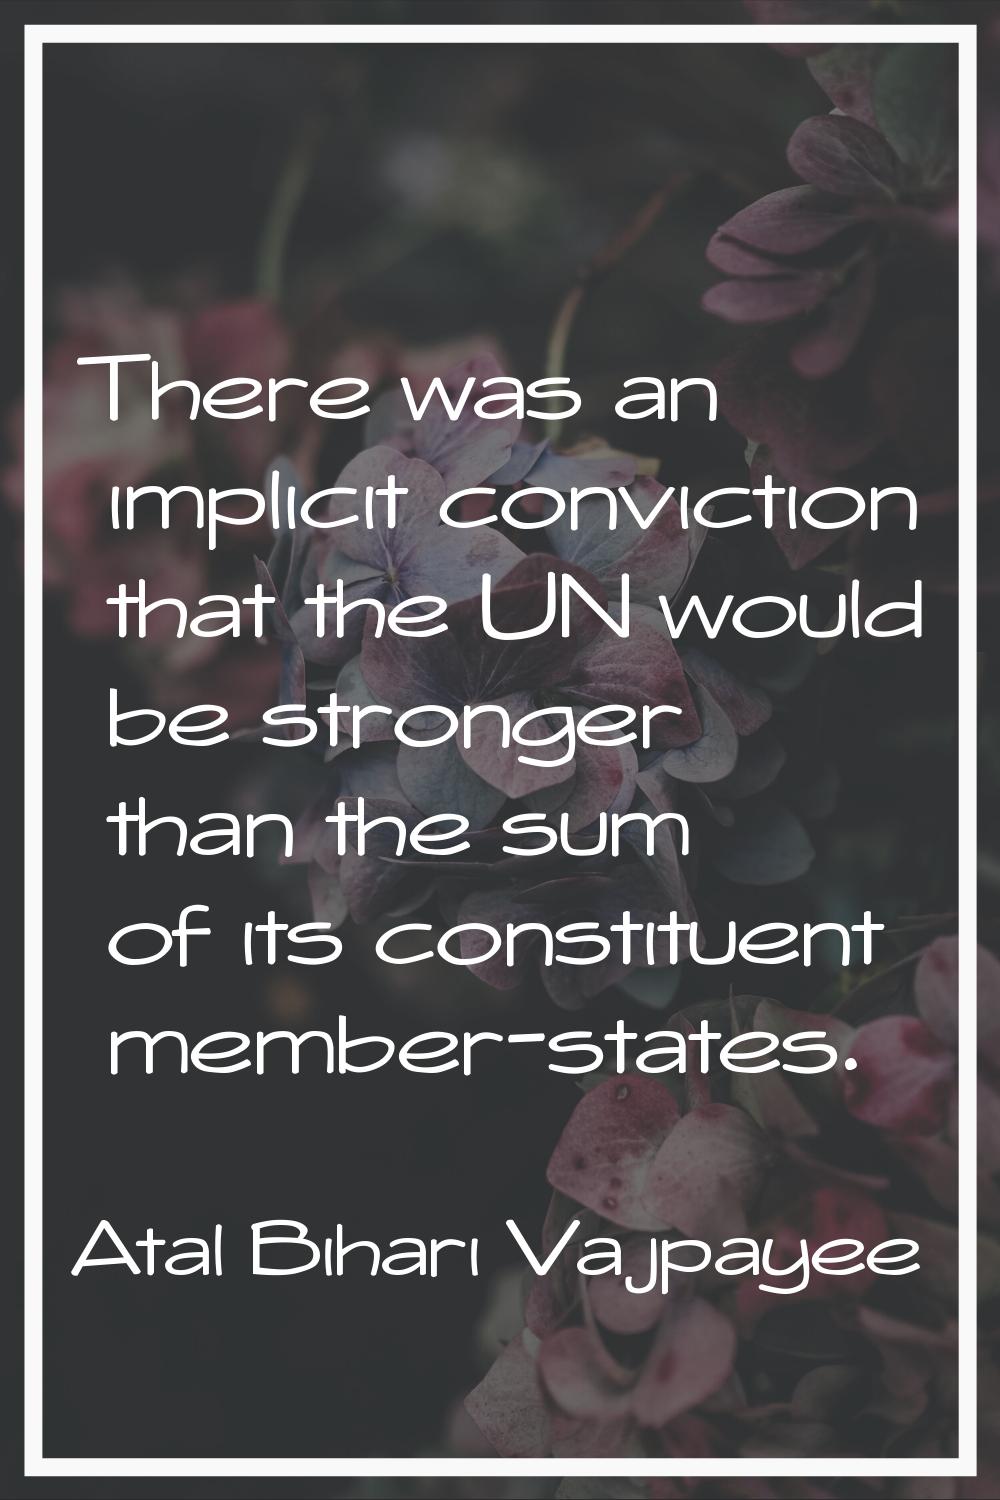 There was an implicit conviction that the UN would be stronger than the sum of its constituent memb